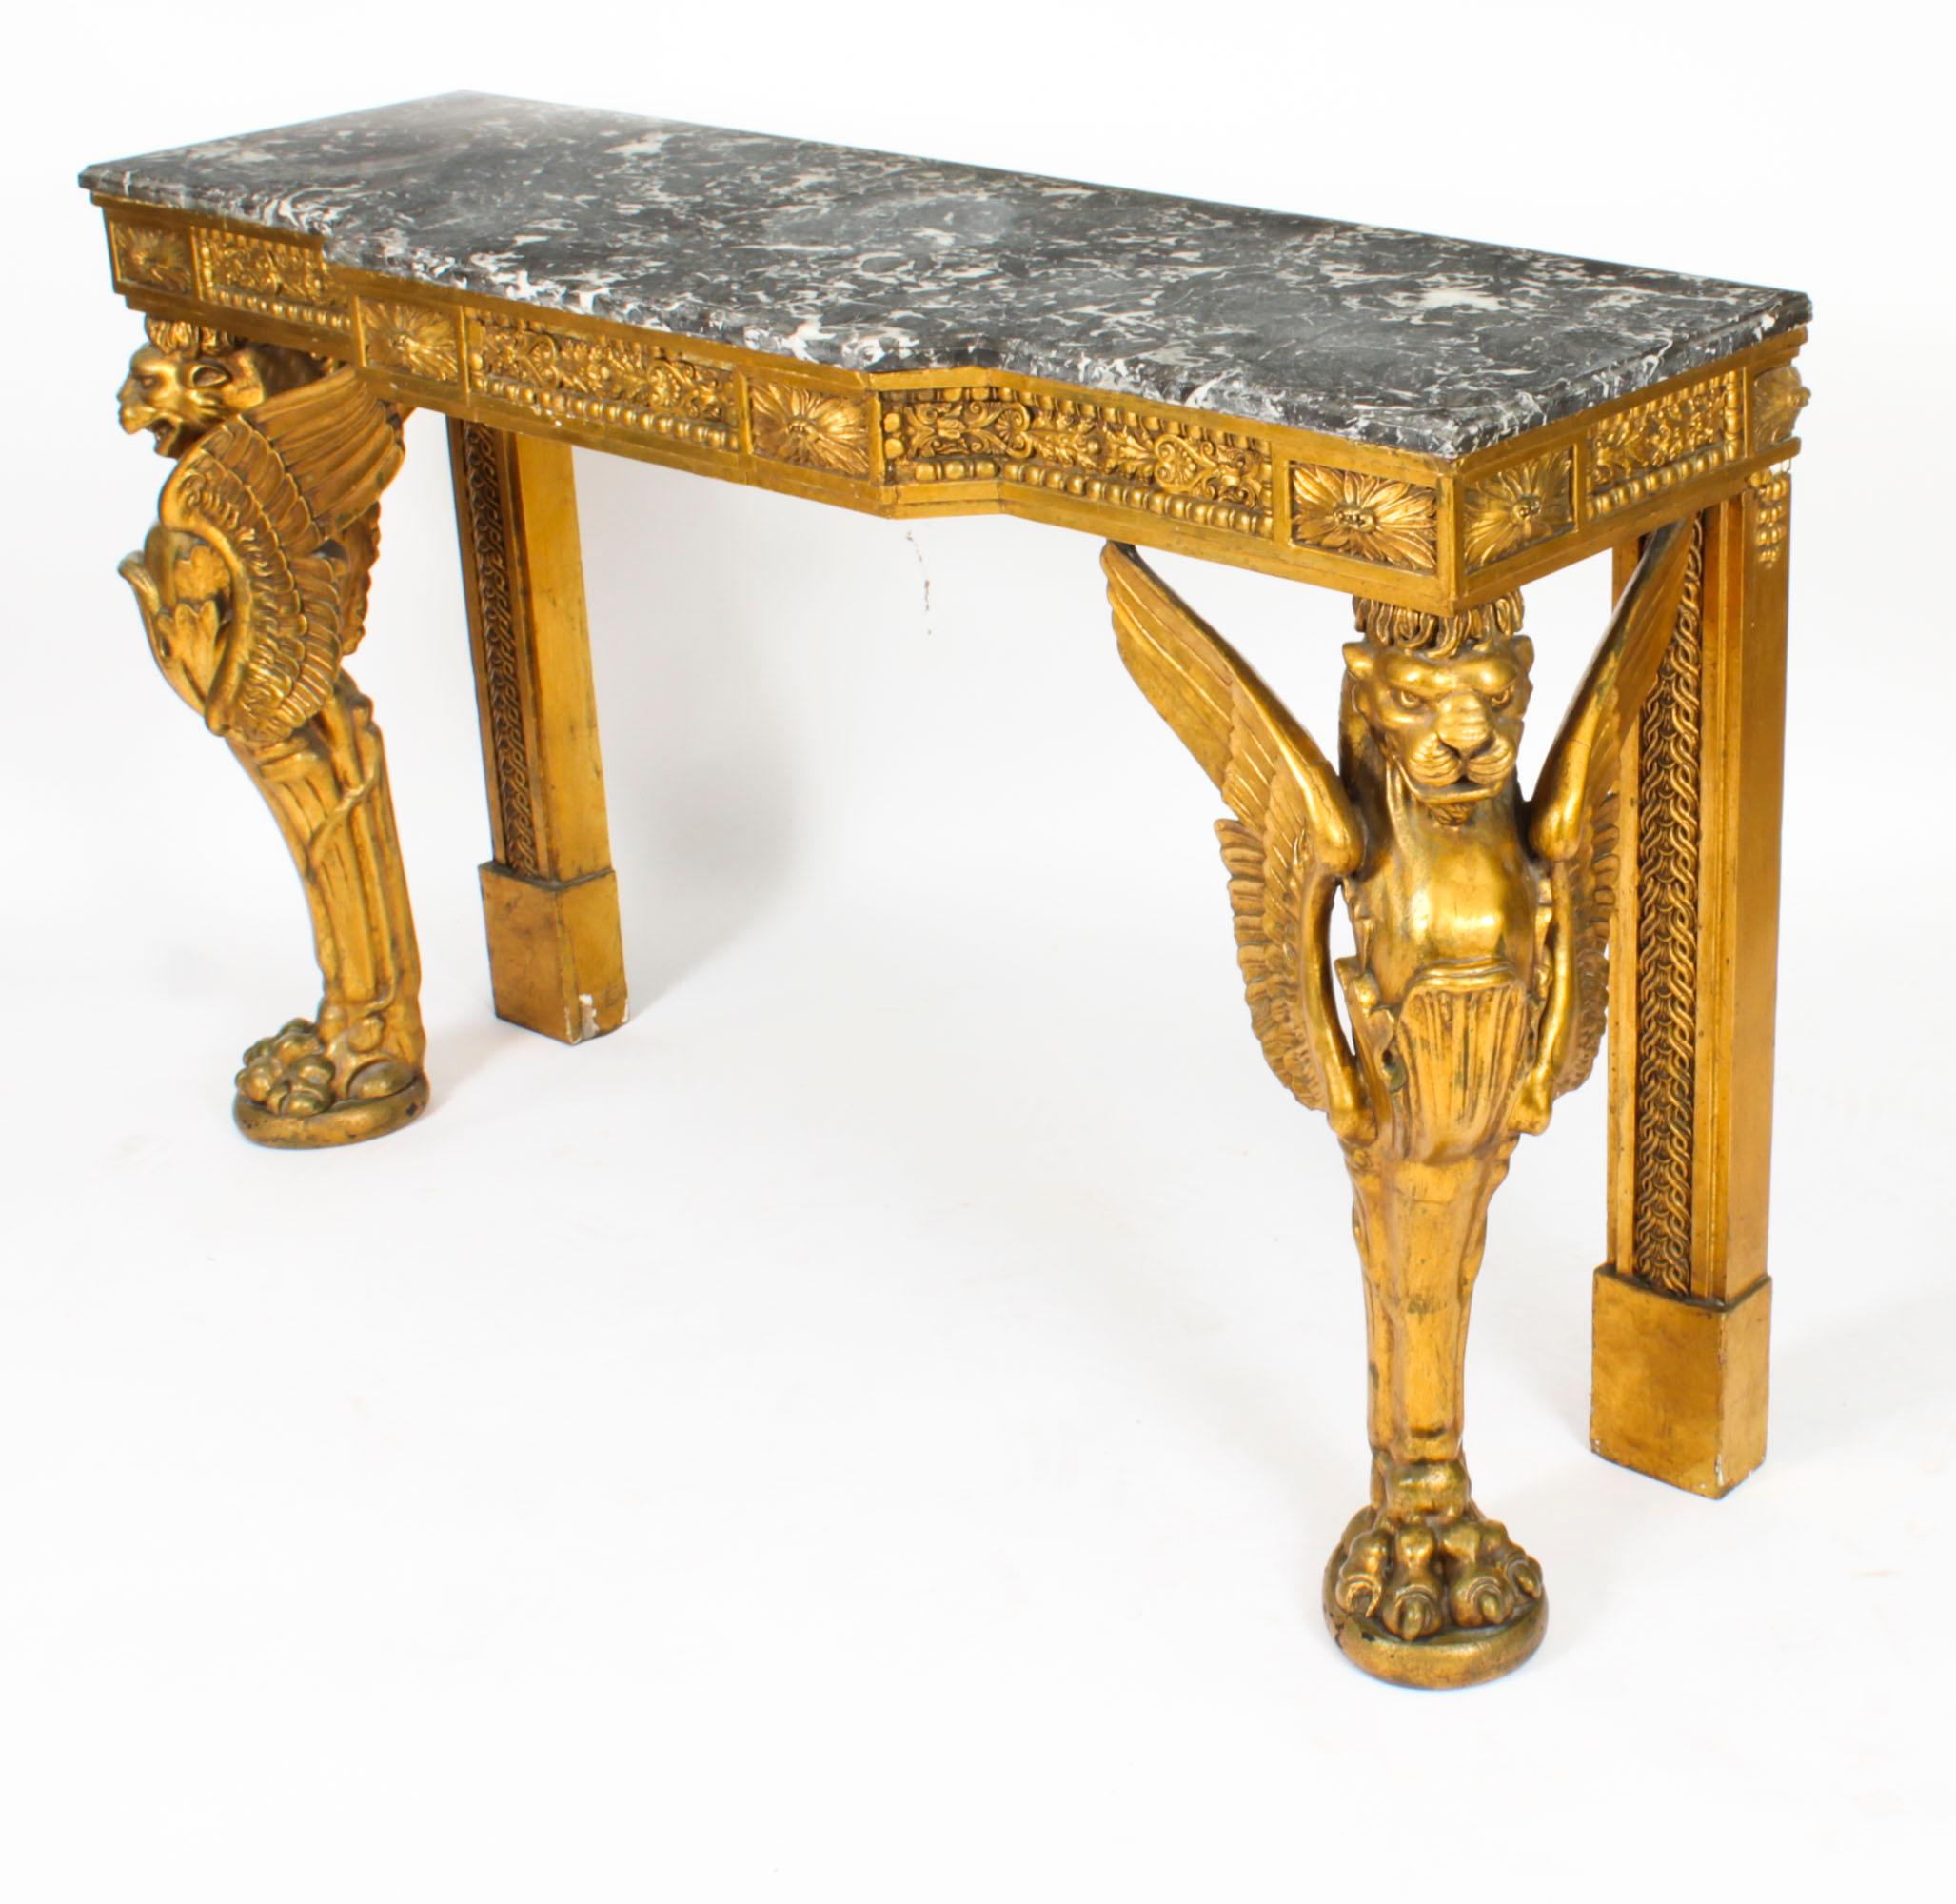 Antique French Neo-Classical Gilded & Marble Top Console Table 1820s For Sale 15